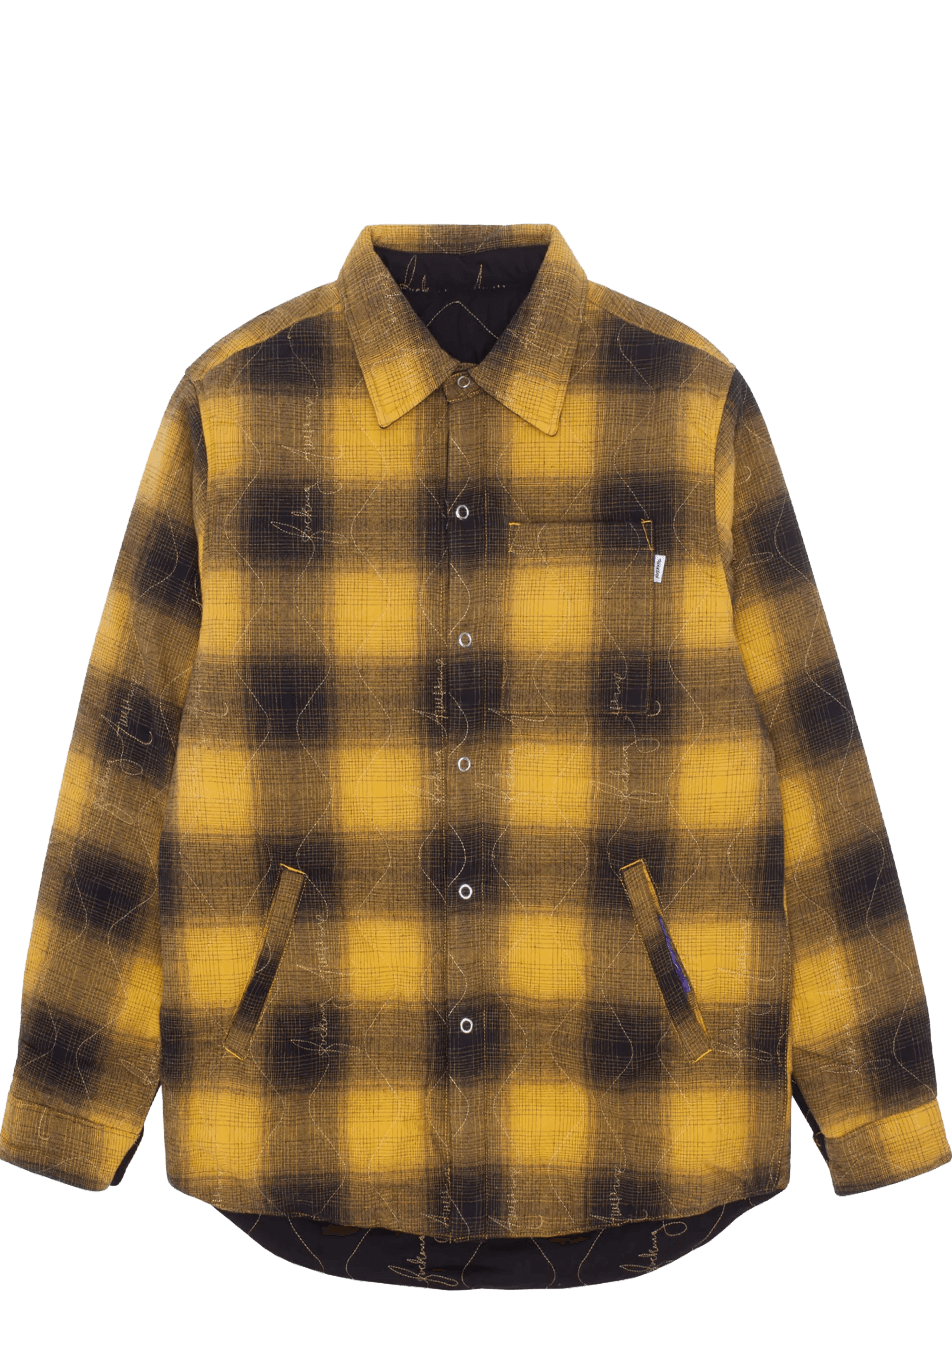 Fucking Awesome Lightweight Reversible Flannel Jacket Black Yellow